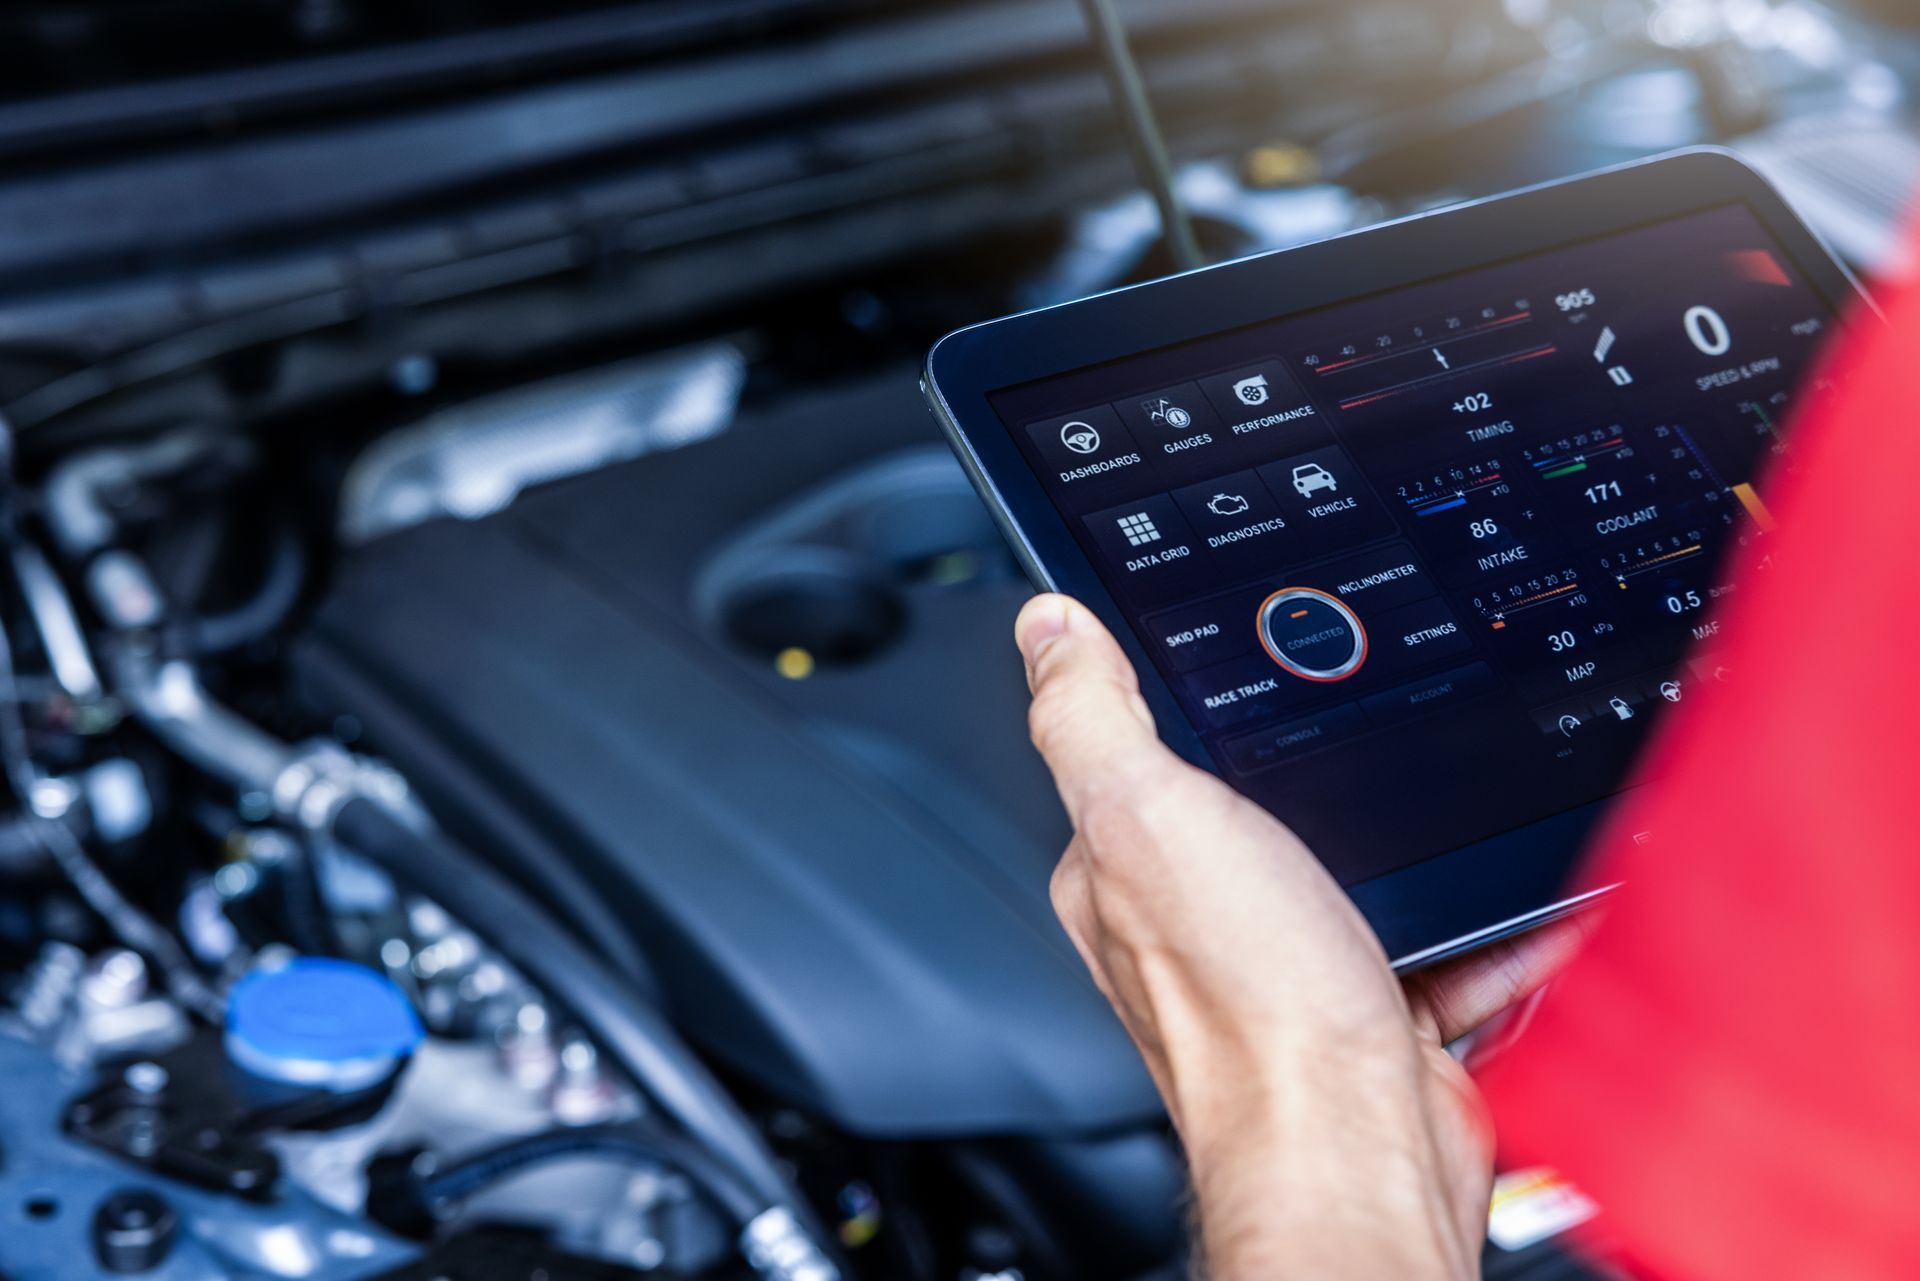 Digital Inspections at ﻿Future Tire and Automotive﻿ in ﻿Holbrook, Lakeside, Pinetop, and Show Low, AZ﻿